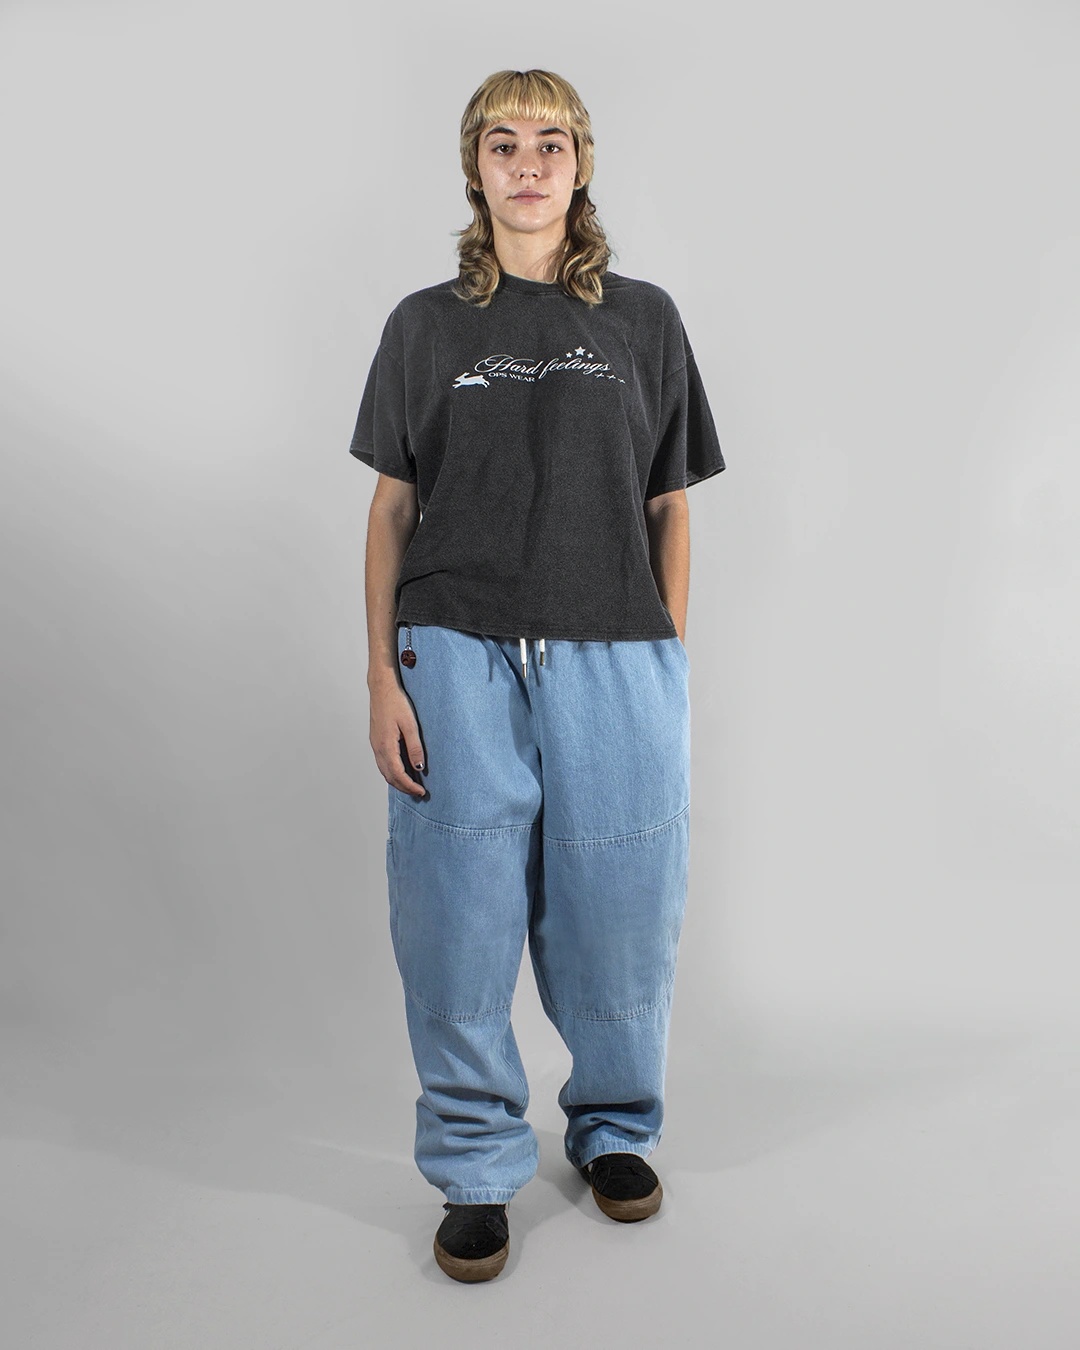 modelo outfit completo remera boxy fit negro gris washed pantalón ancho skater recto baggy